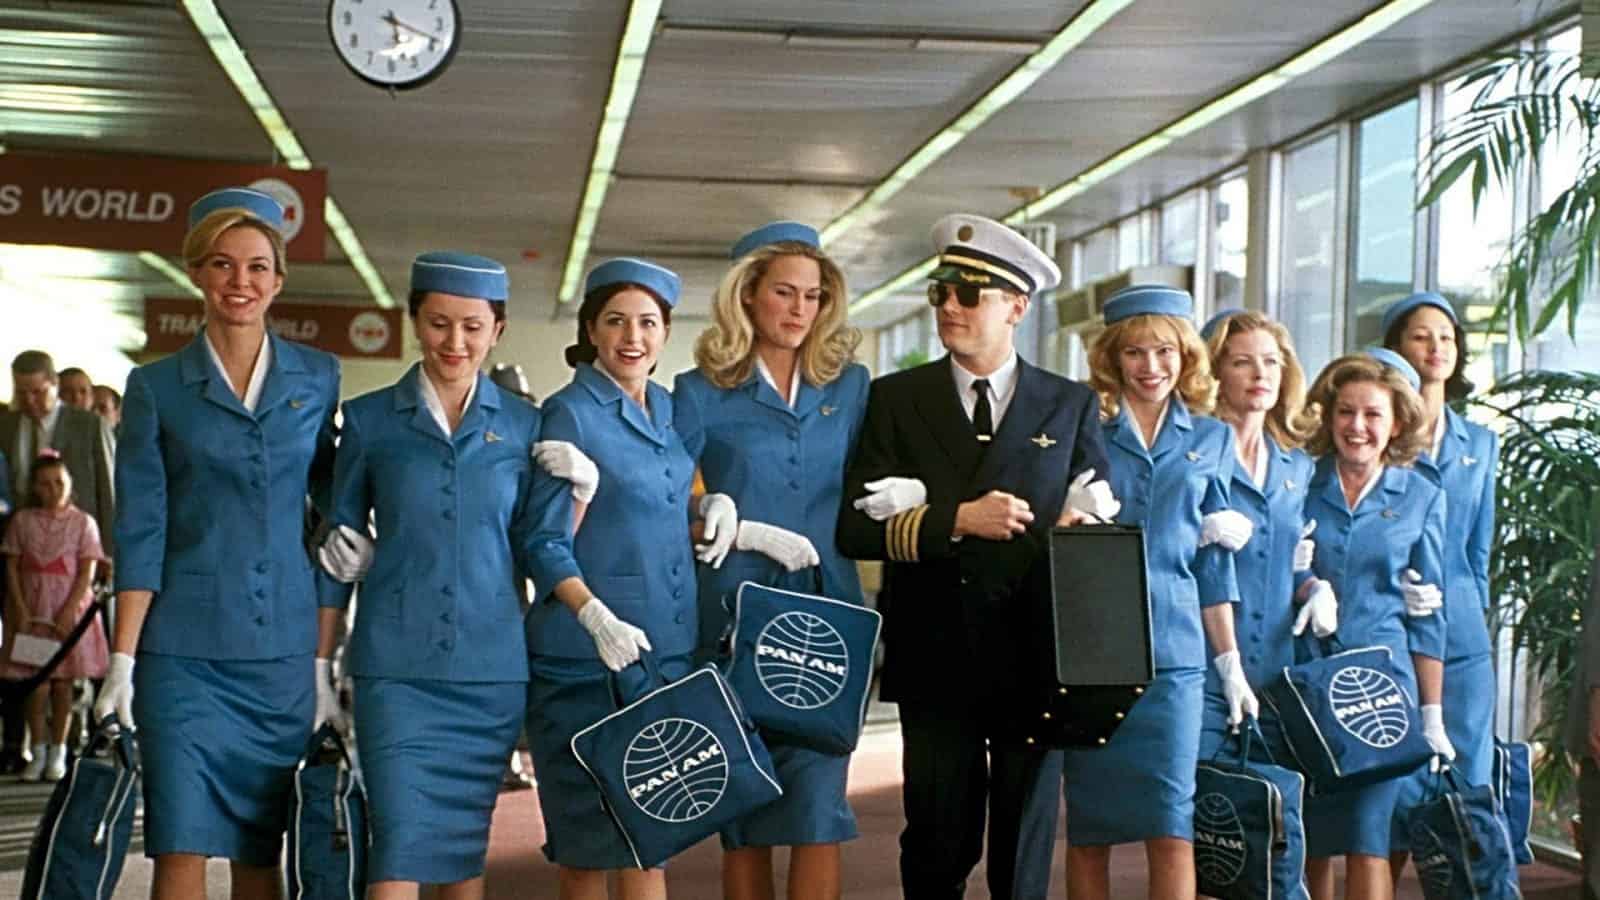 Pan Am stewardesses walk arm-in-arm with a pilot in this image from DreamWorks Pictures.